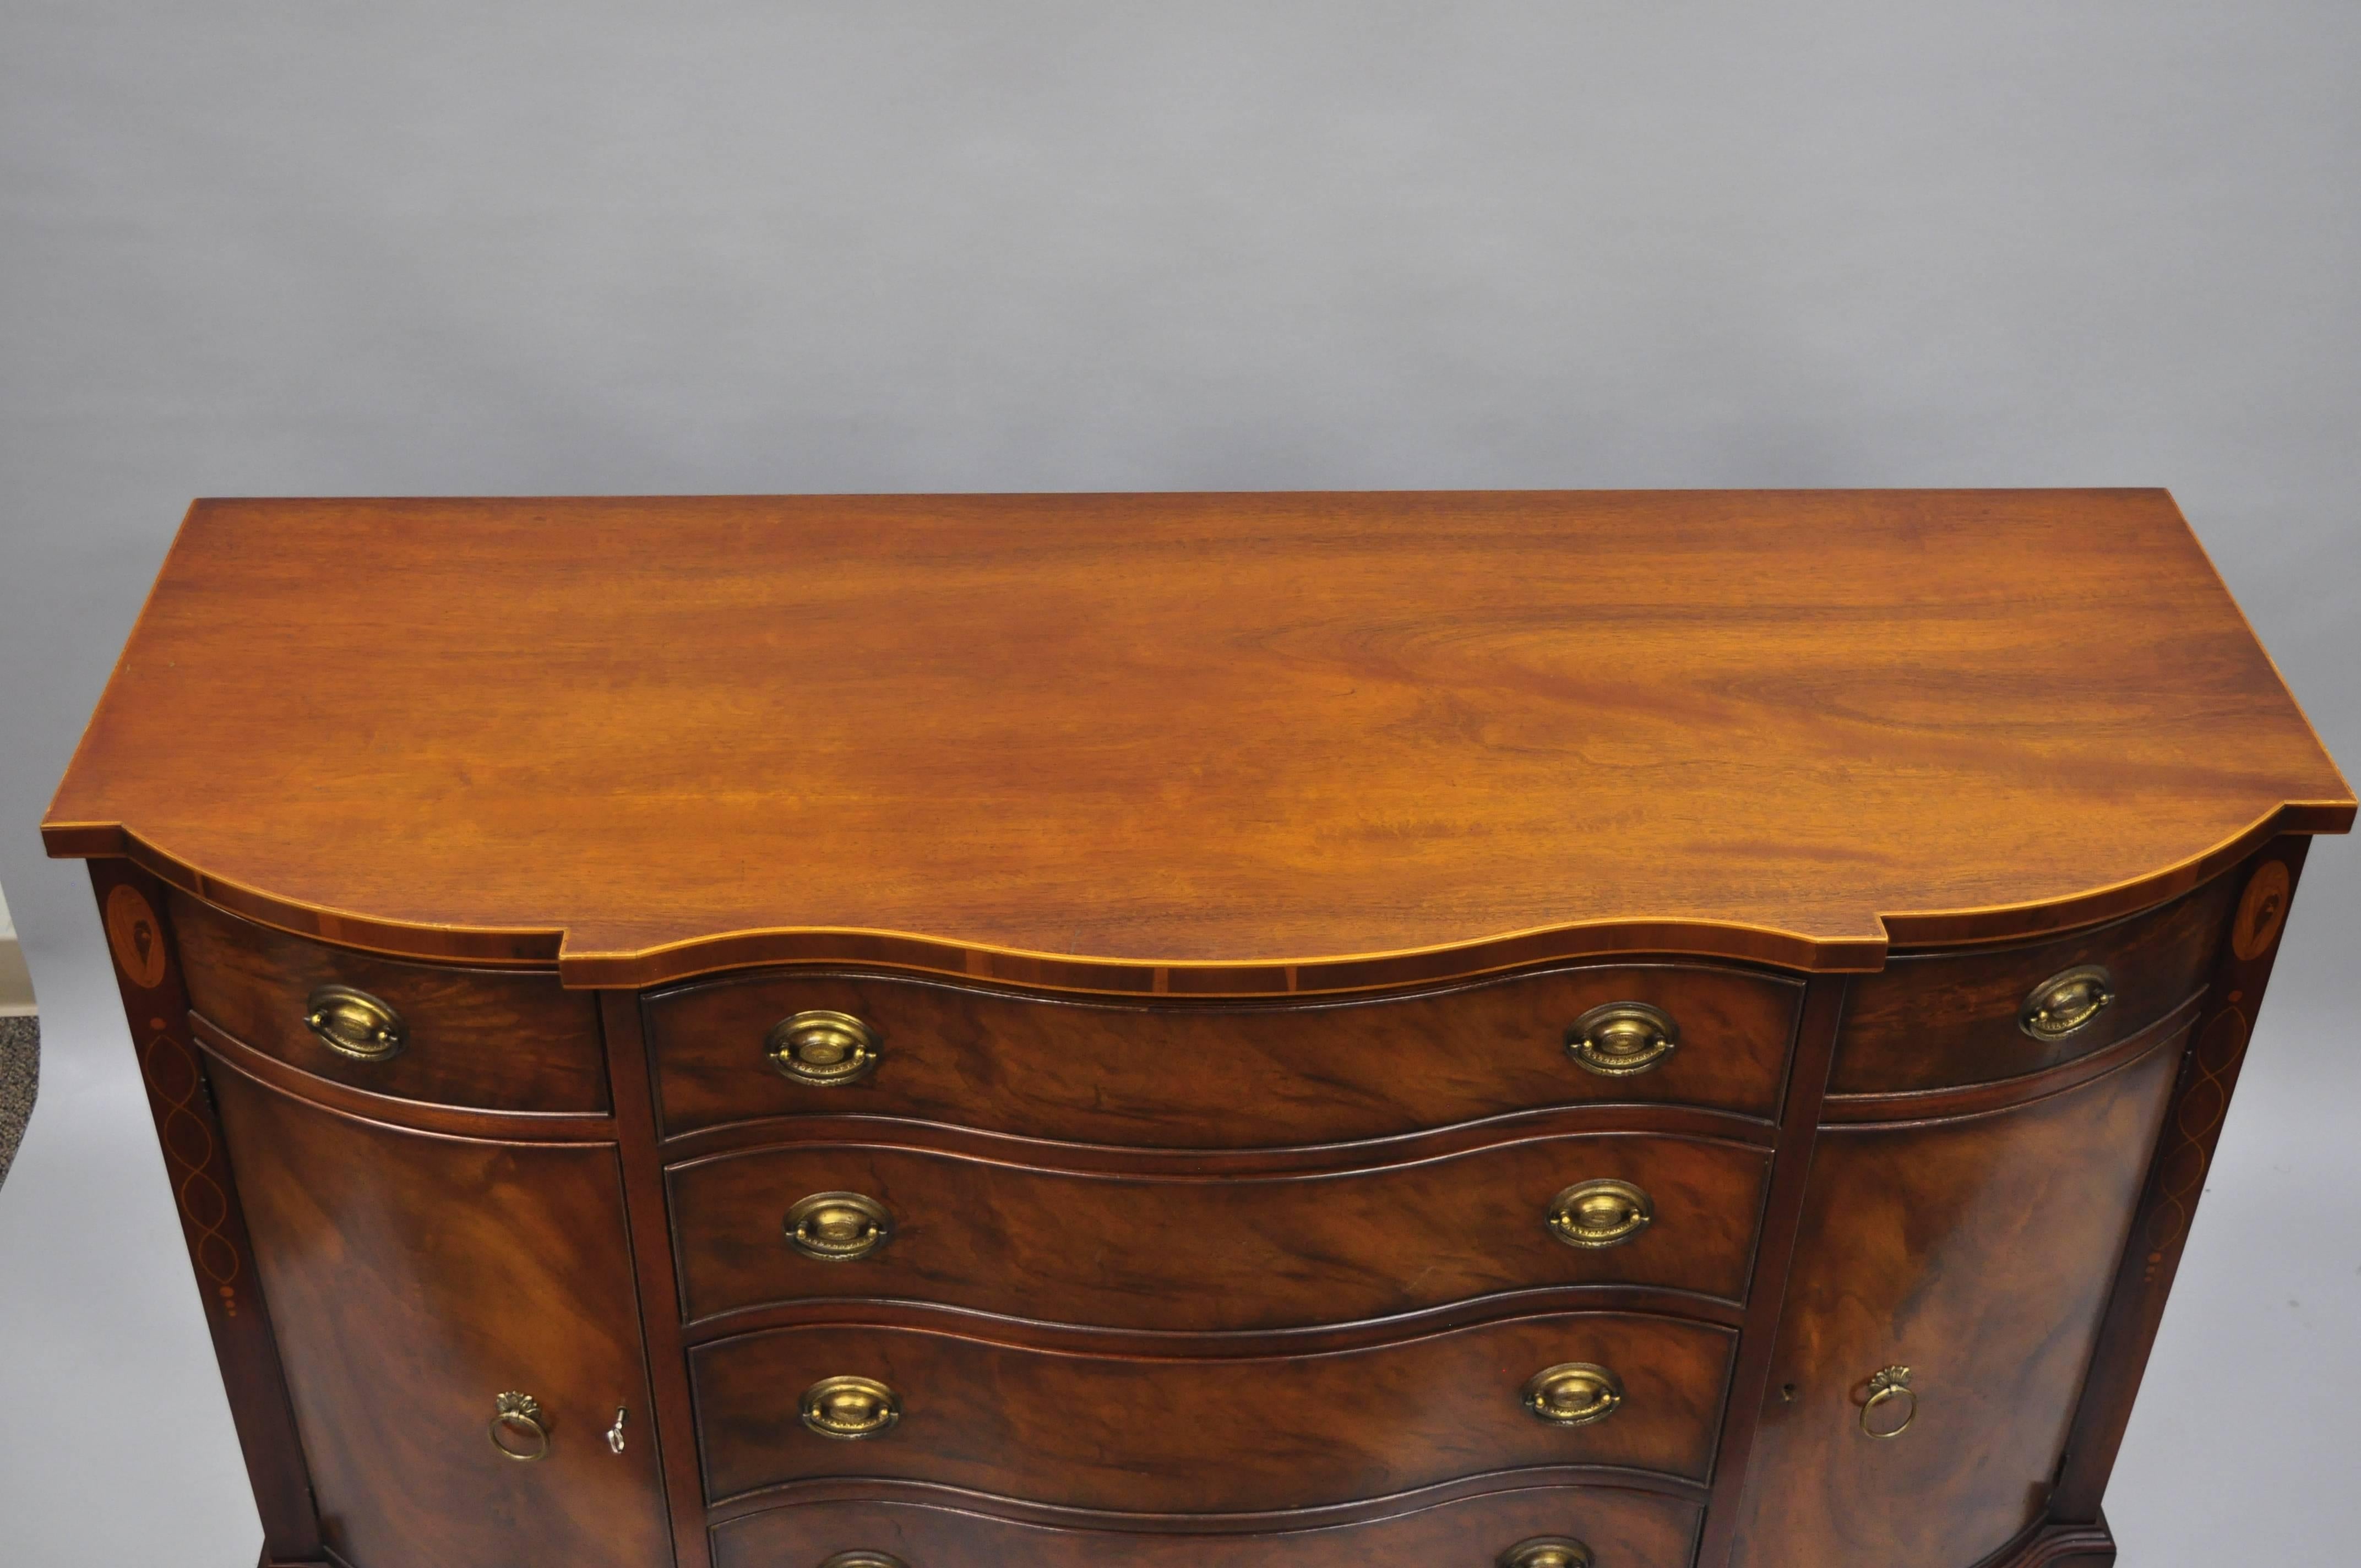 Sheraton Drexel Wallace Nutting Serpentine Front Mahogany Sideboard Server Buffet